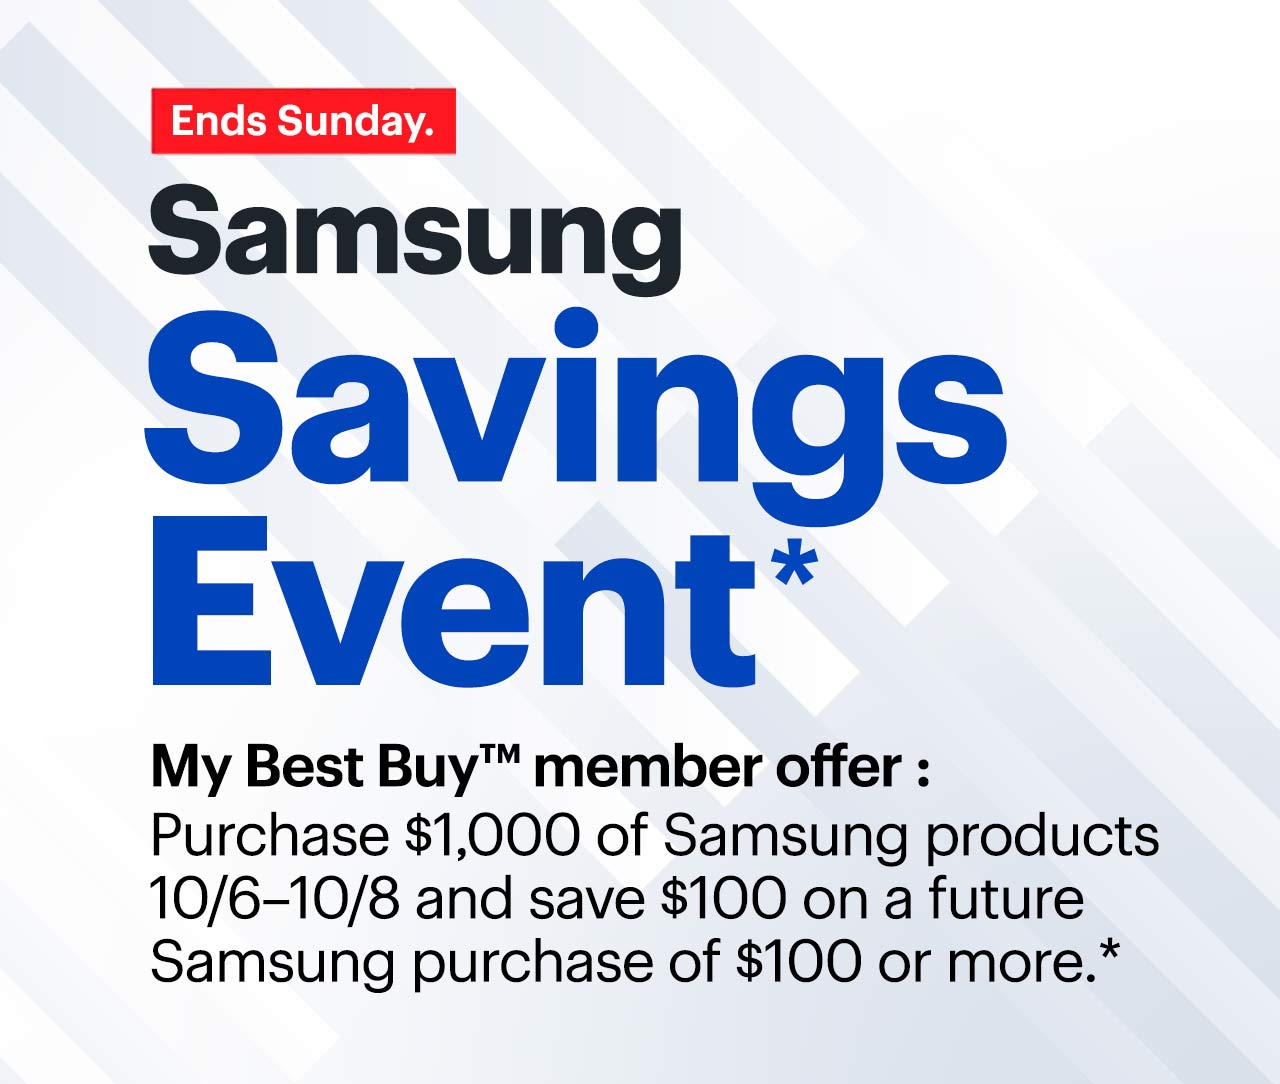 Samsung Savings Event. Ends Sunday. My Best Buy™ Member Exclusive: Purchase $1,000 of Samsung products 10/6–10/8 and save $100 on a future Samsung purchase of $100 or more. Reference disclaimer.